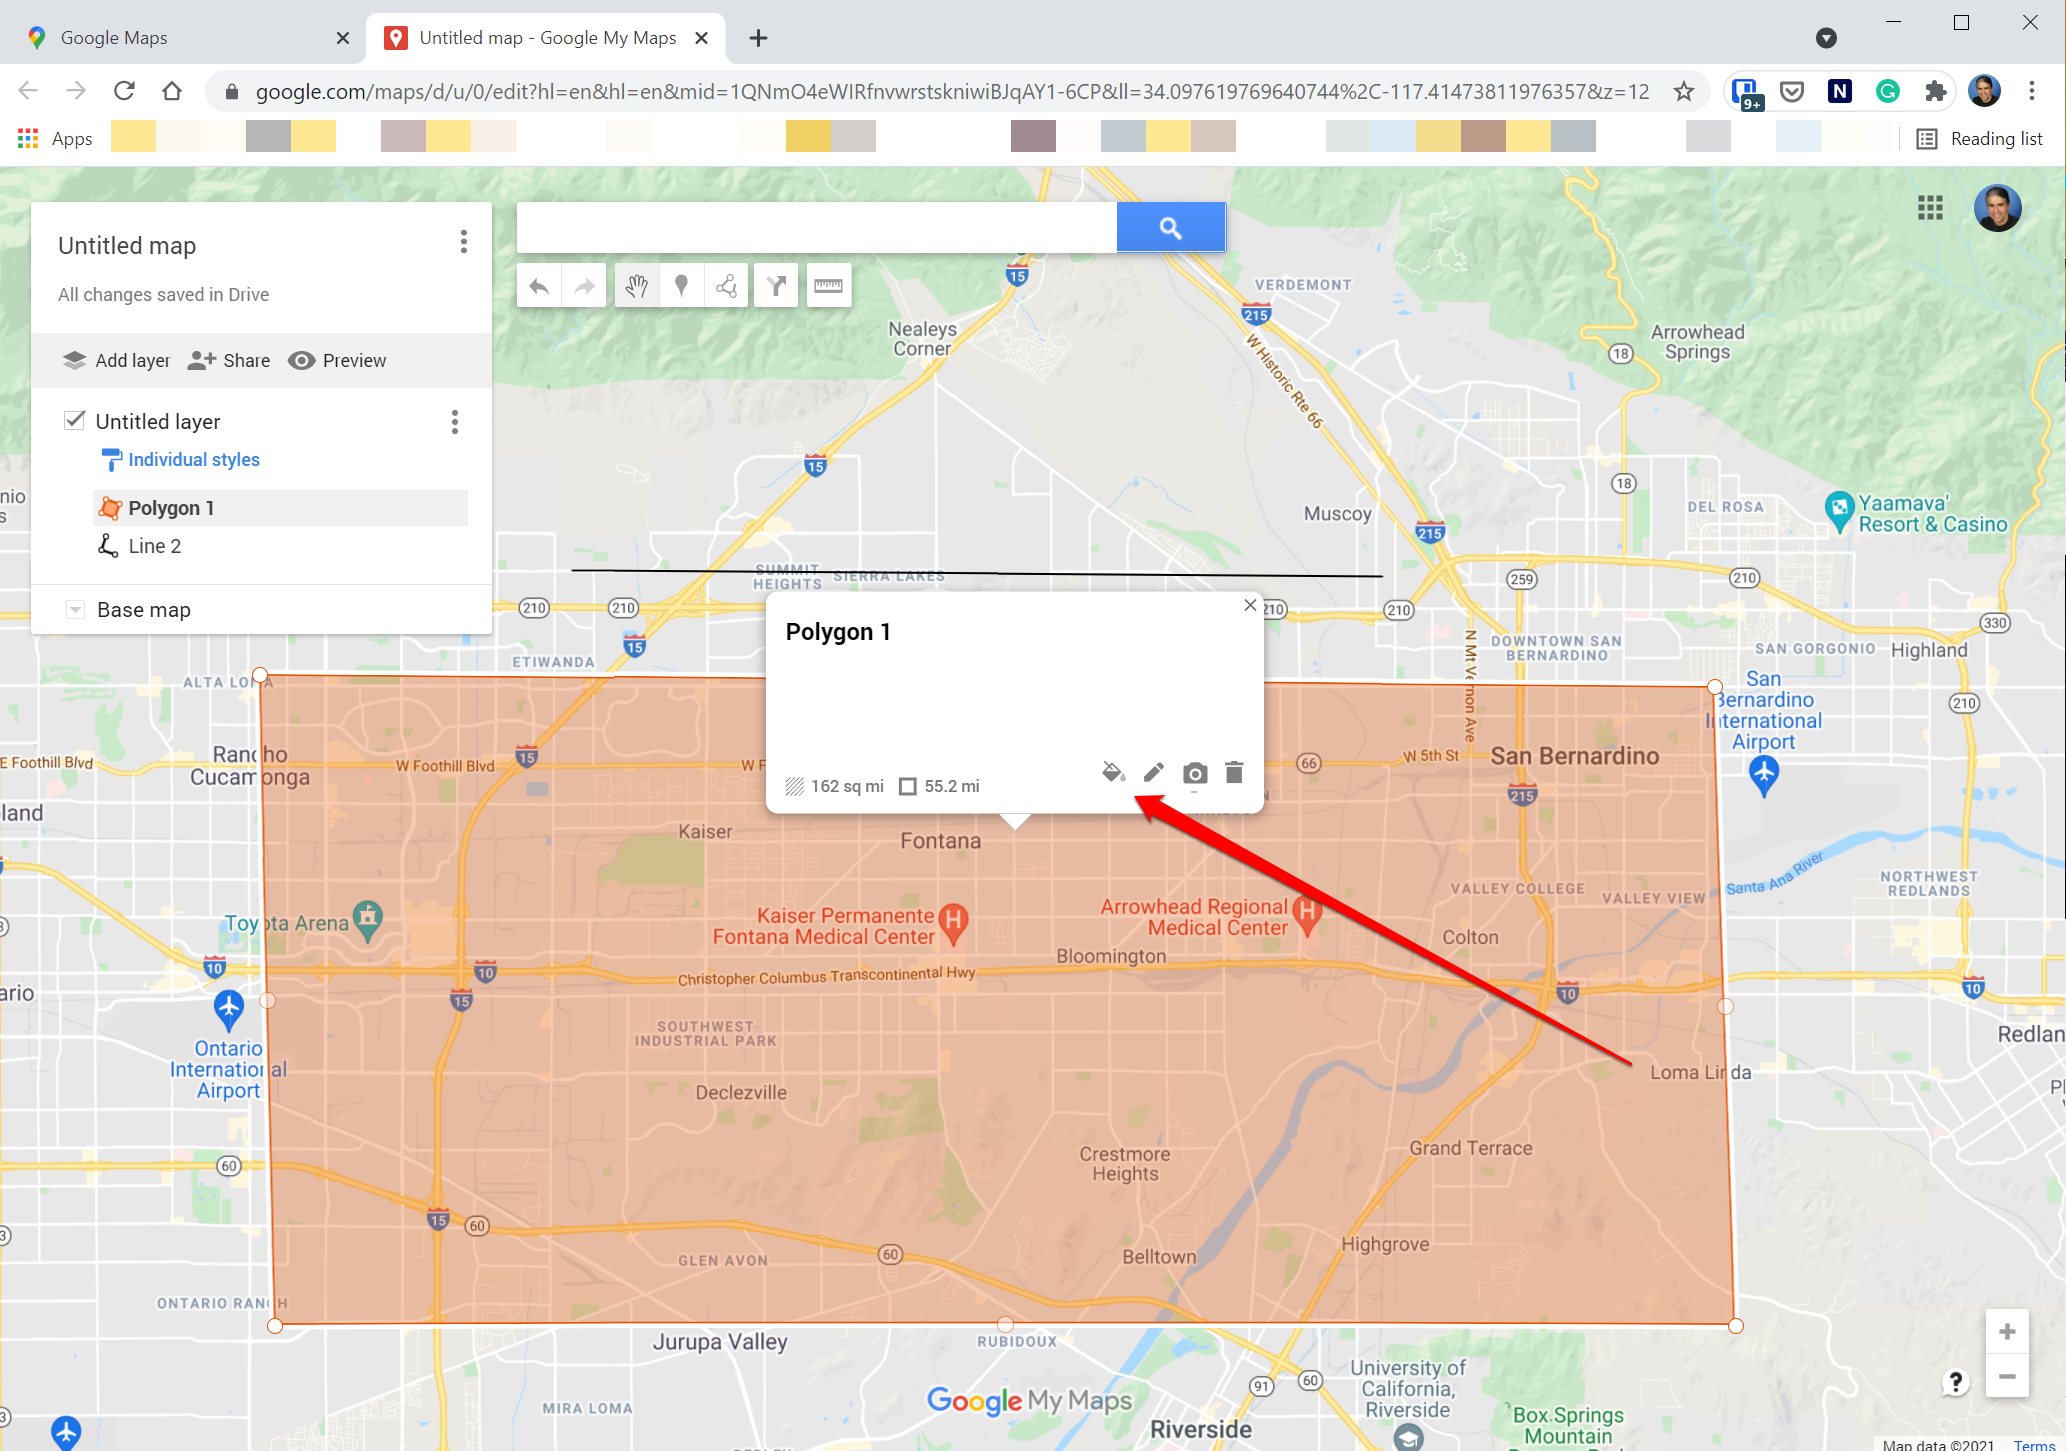 How to draw a route on Google Maps to create custom directions or plan